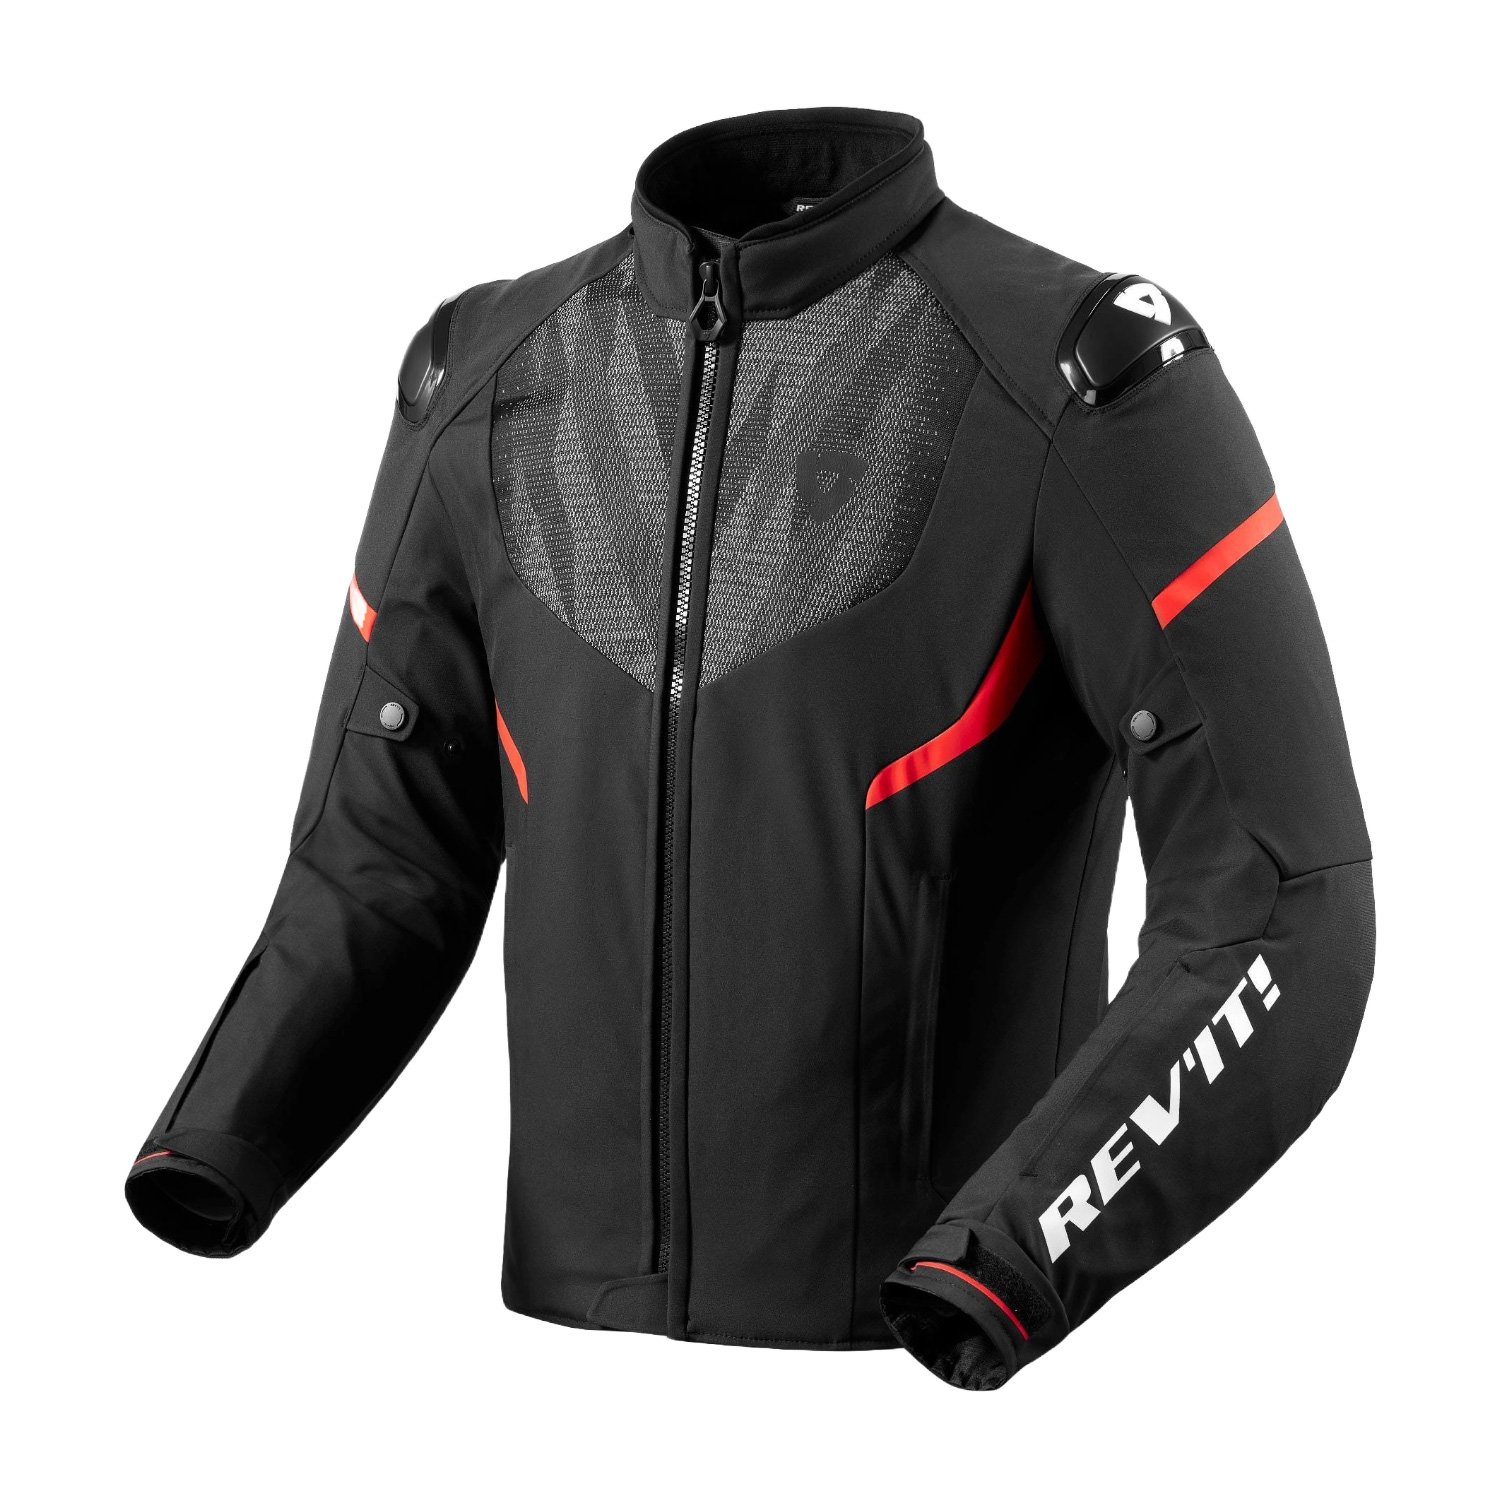 Image of REV'IT! Hyperspeed 2 H2O Jacket Black Neon Red Size XL ID 8700001367257